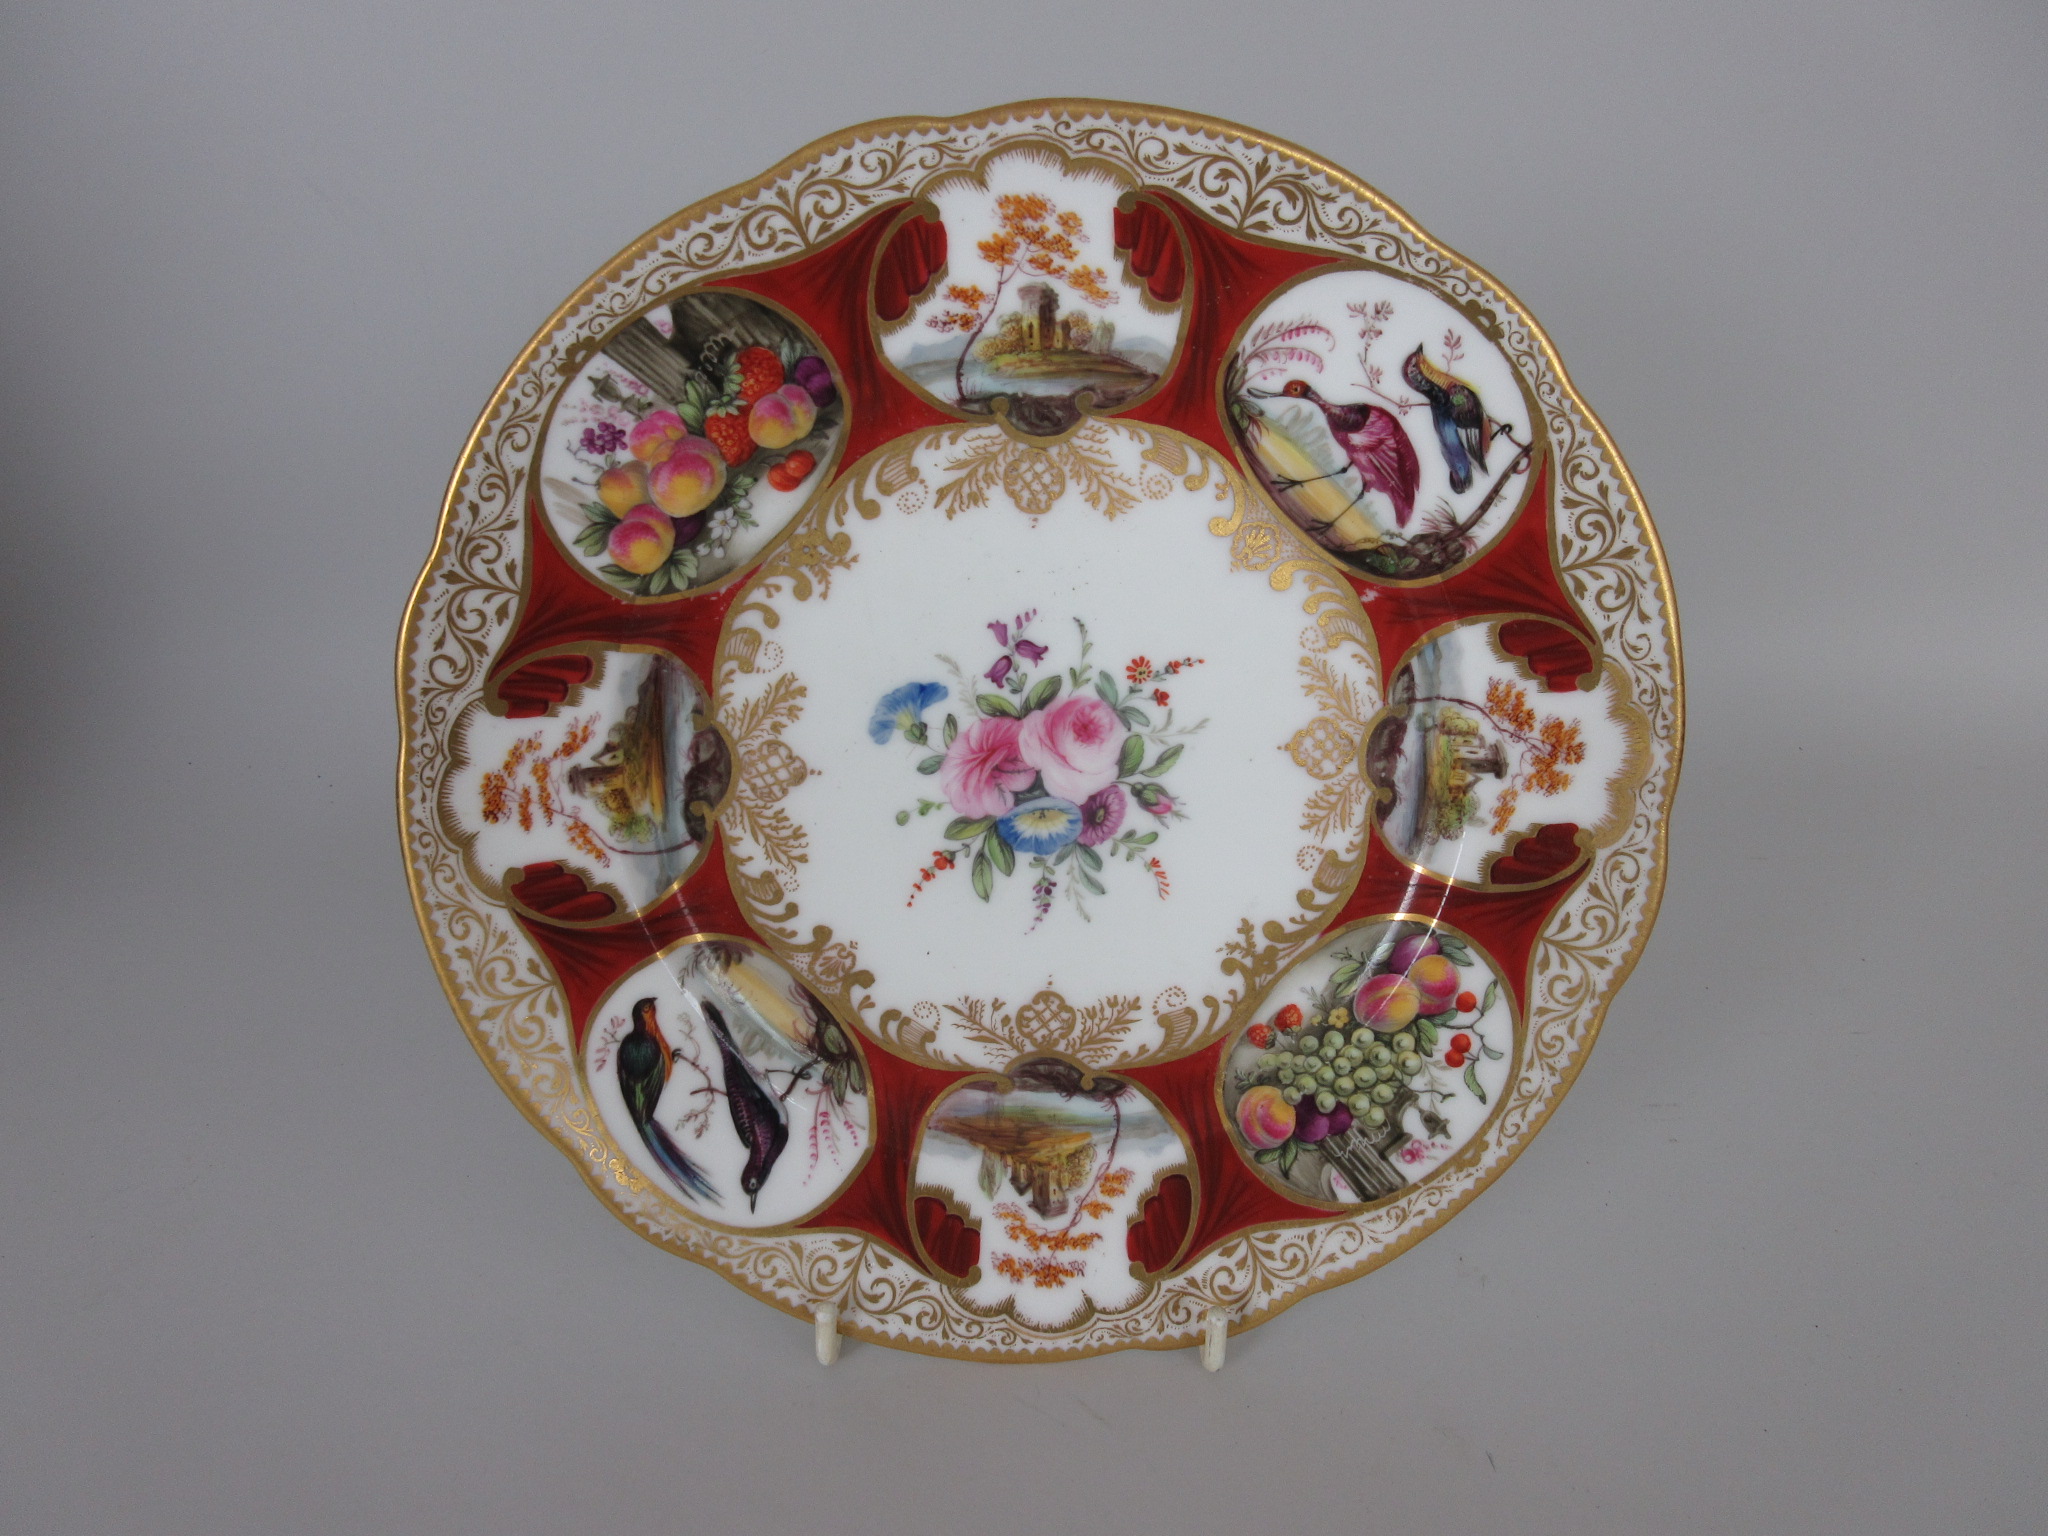 A Nantgarw porcelain Plate of Duke of Cambridge Service type, central bouquet of flowers with